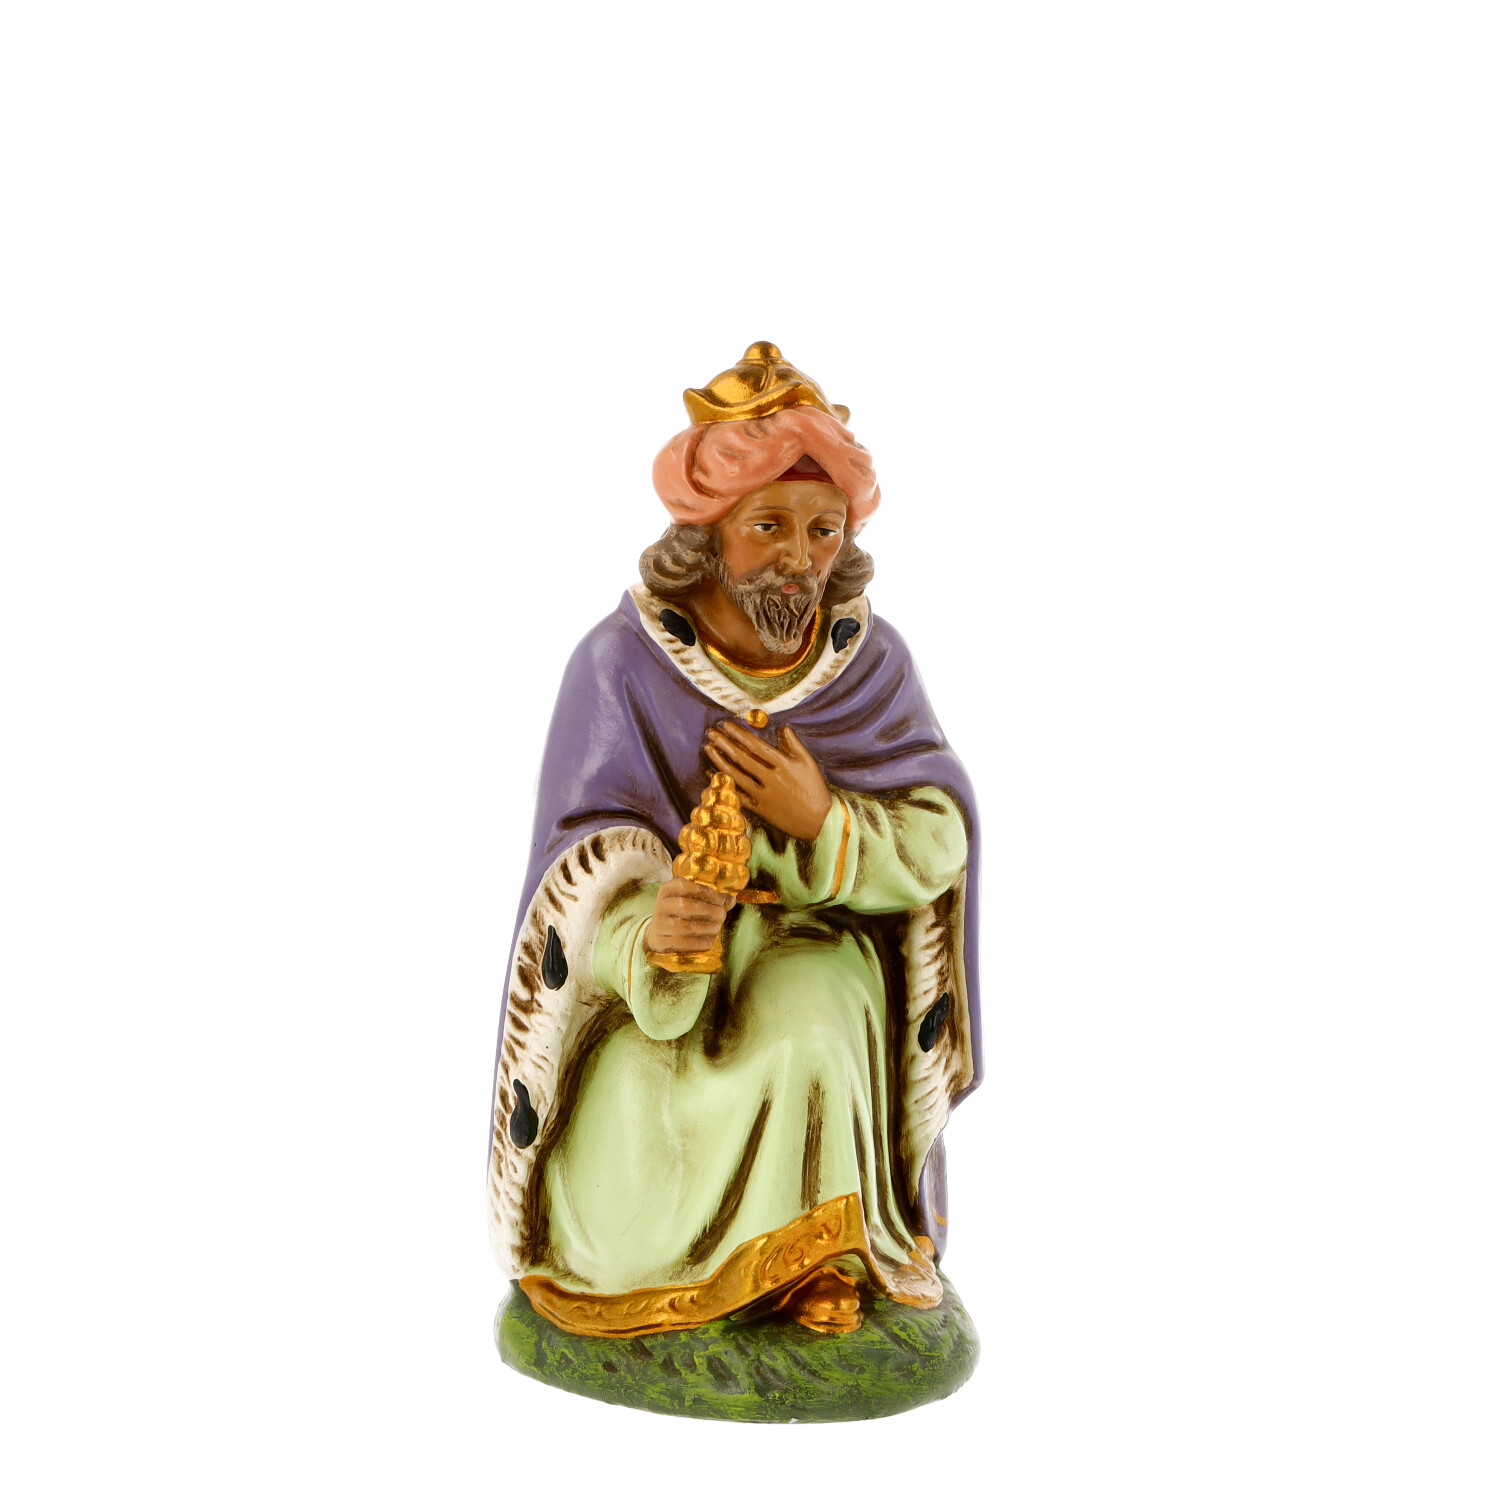 Melchior, to 6.75 in. figures - Marolin Papermaché - made in Germany